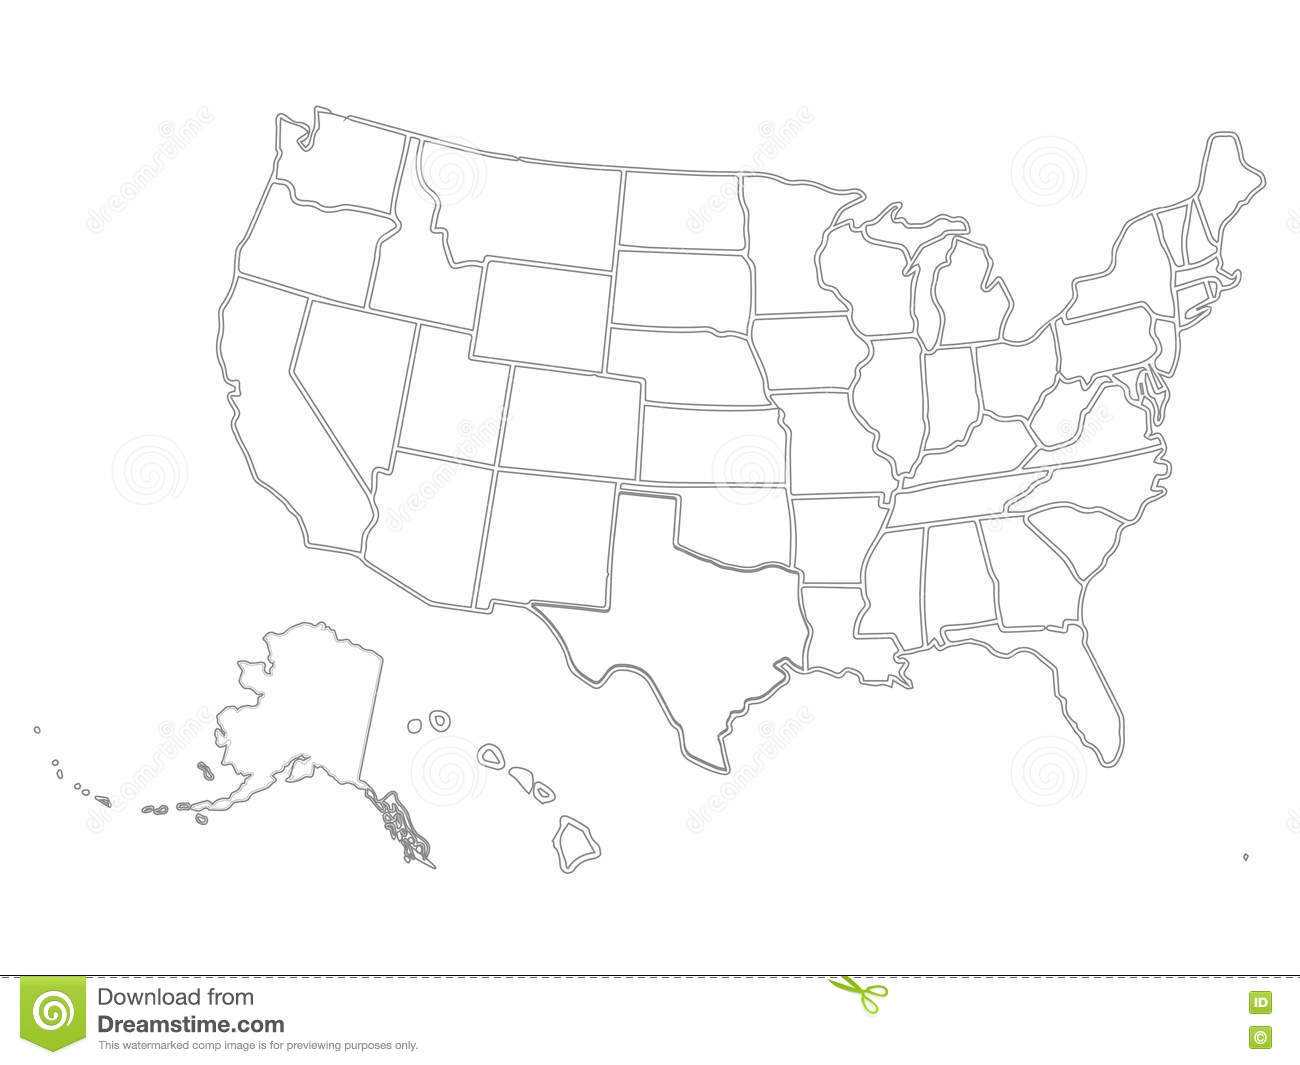 Blank Similar Usa Map On White Background. United States Of In Blank Template Of The United States